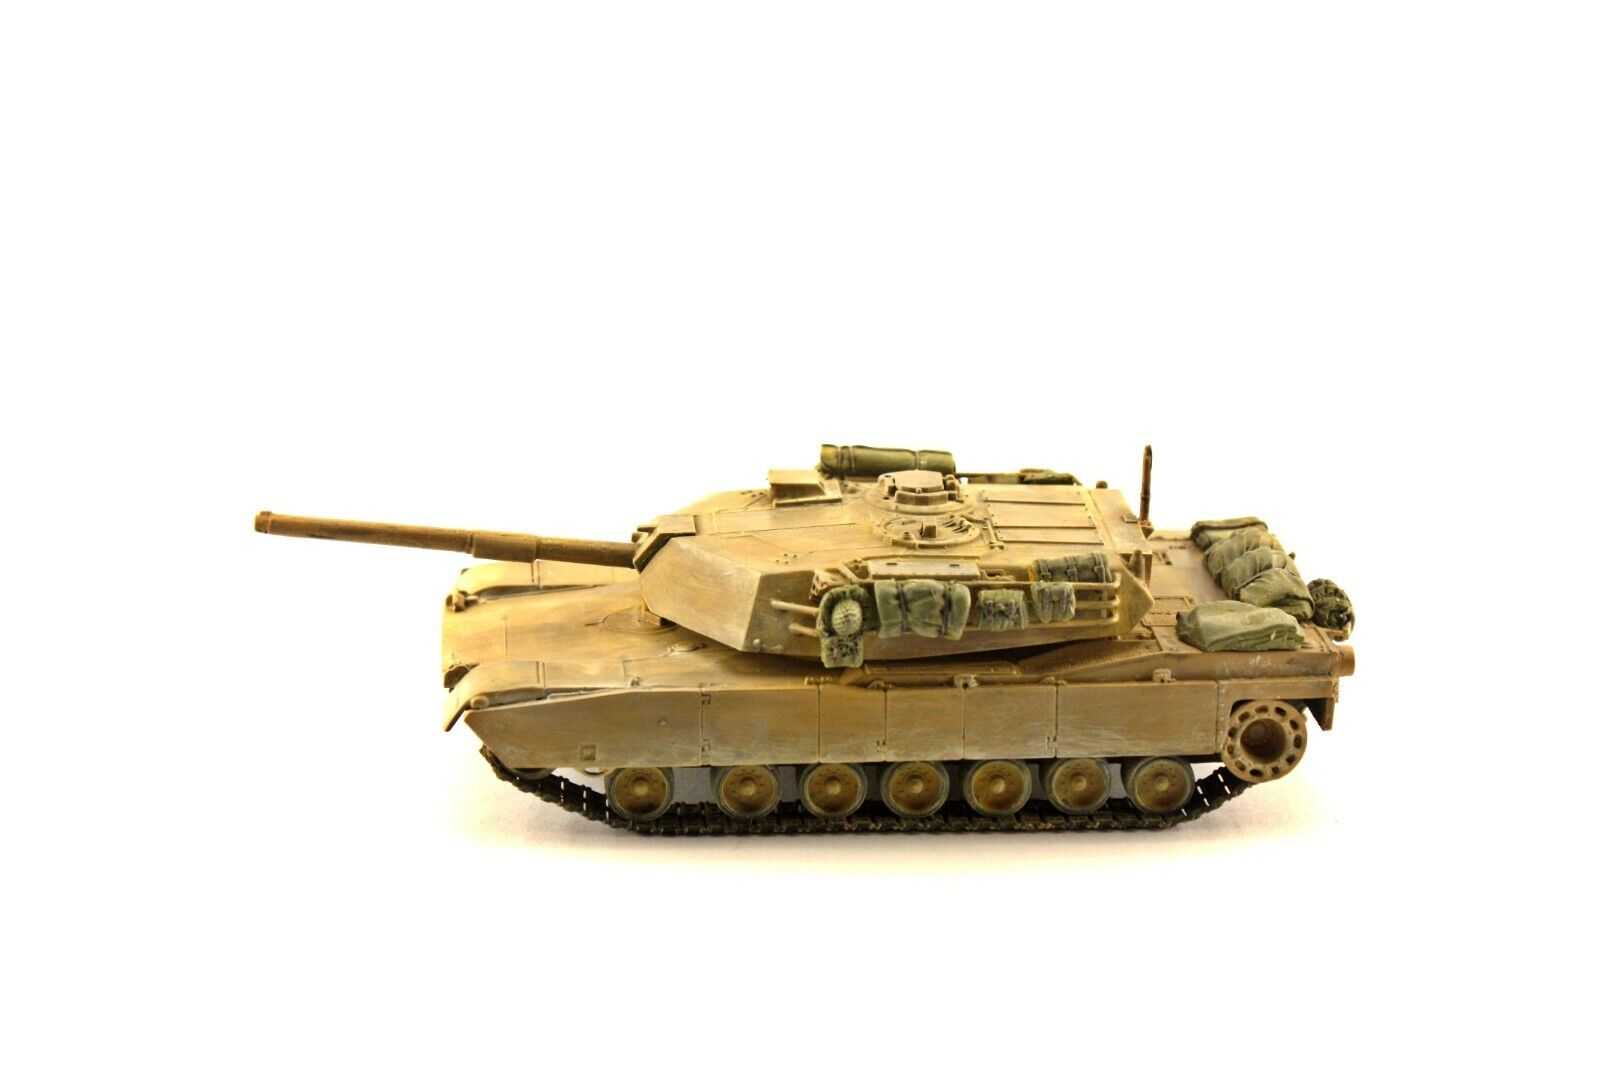 1:72 Stowage Kit for M1 Abrams Tank Military Scale Model.